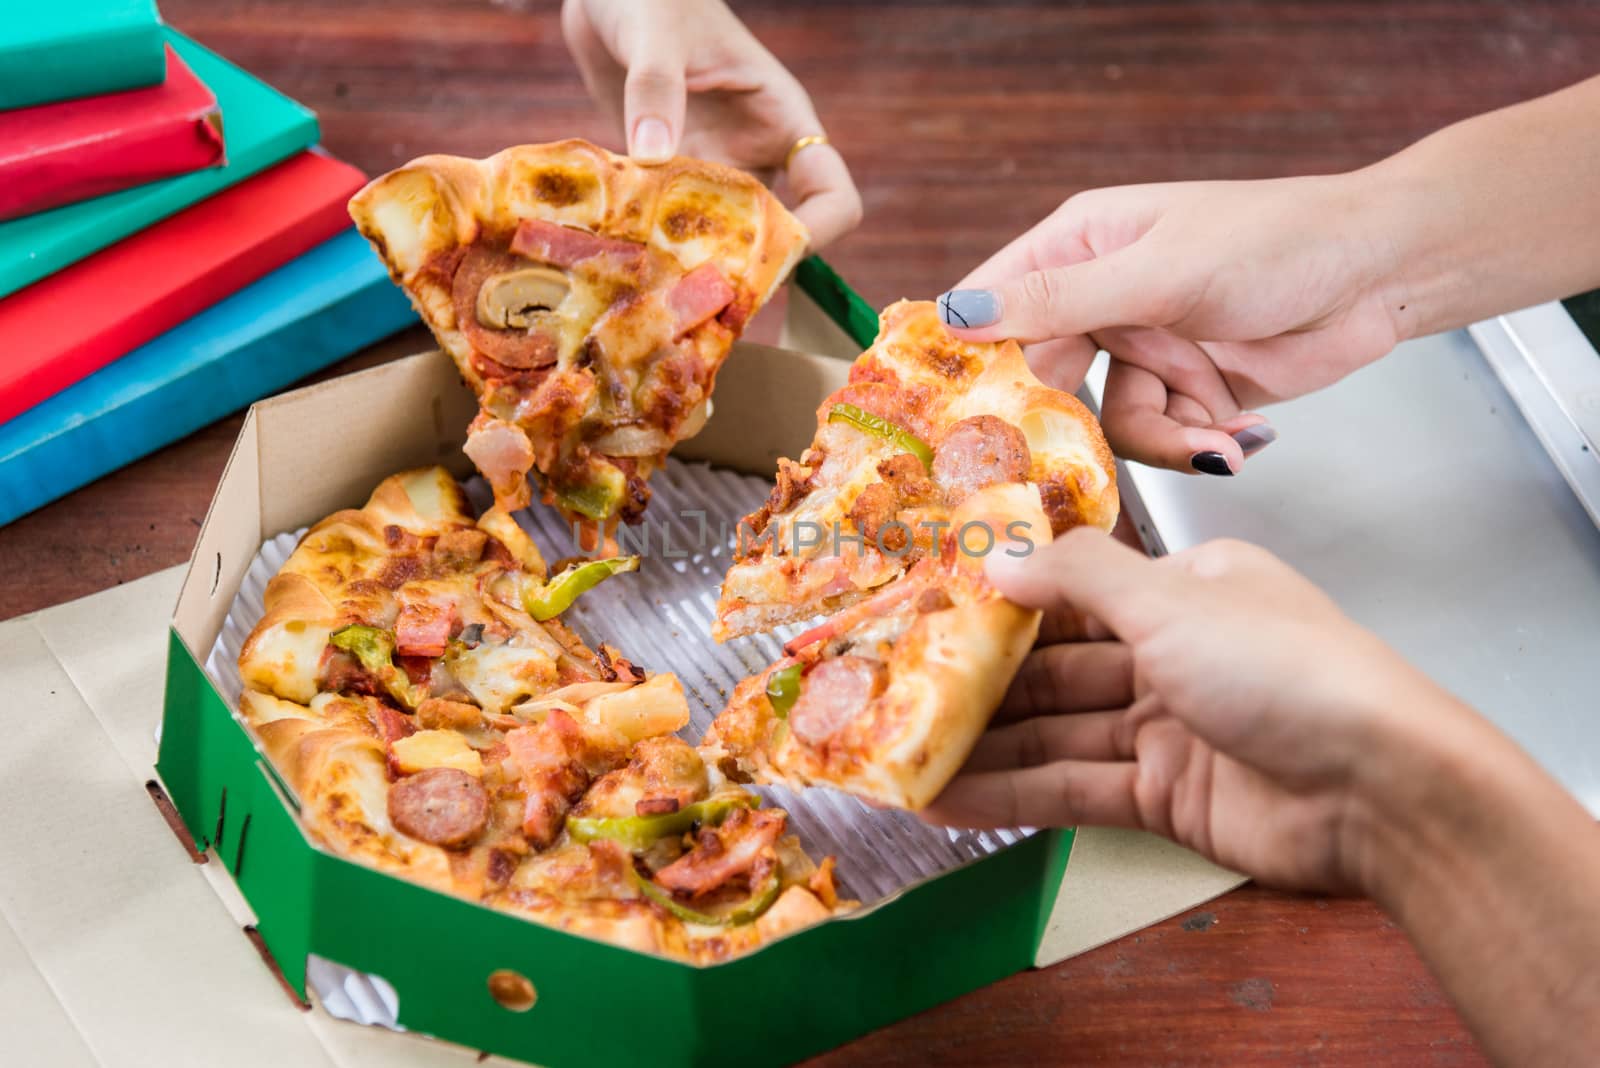 Hands taking pizza slices from green box